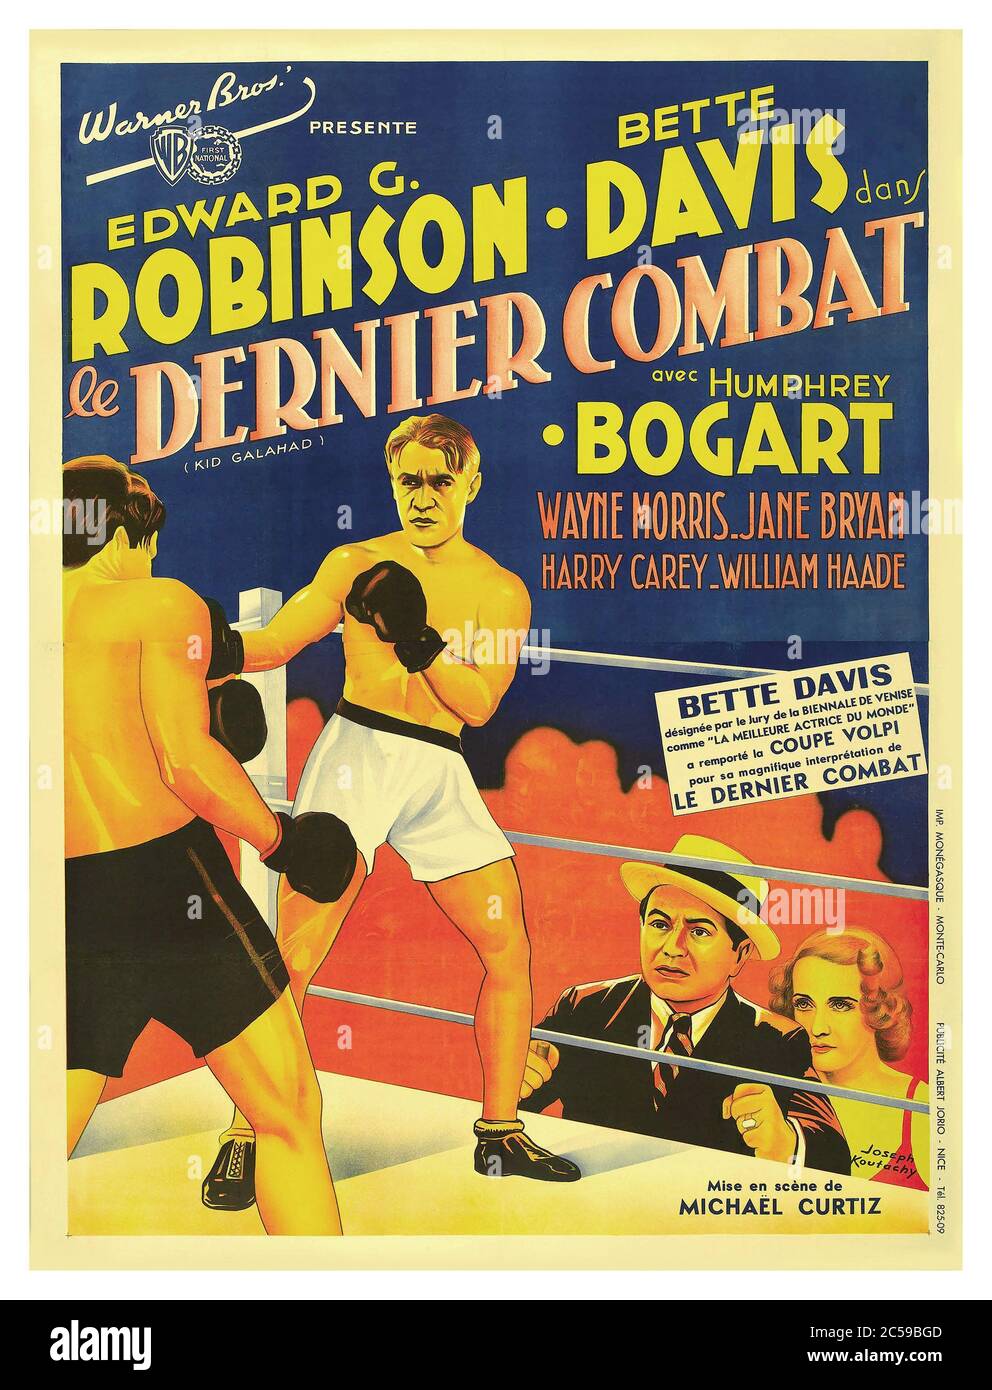 Vintage 1937 movie film with French title: 'Le dernier combat'  Directed by Michael Curtiz with Edward G. Robinson, Bette Davis, Humphrey Bogart. also starring Wayne Morris, Jayne Bryan, Harry Carey, William Haade. Boxing themed lithograph poster produced by Warner Brothers Stock Photo